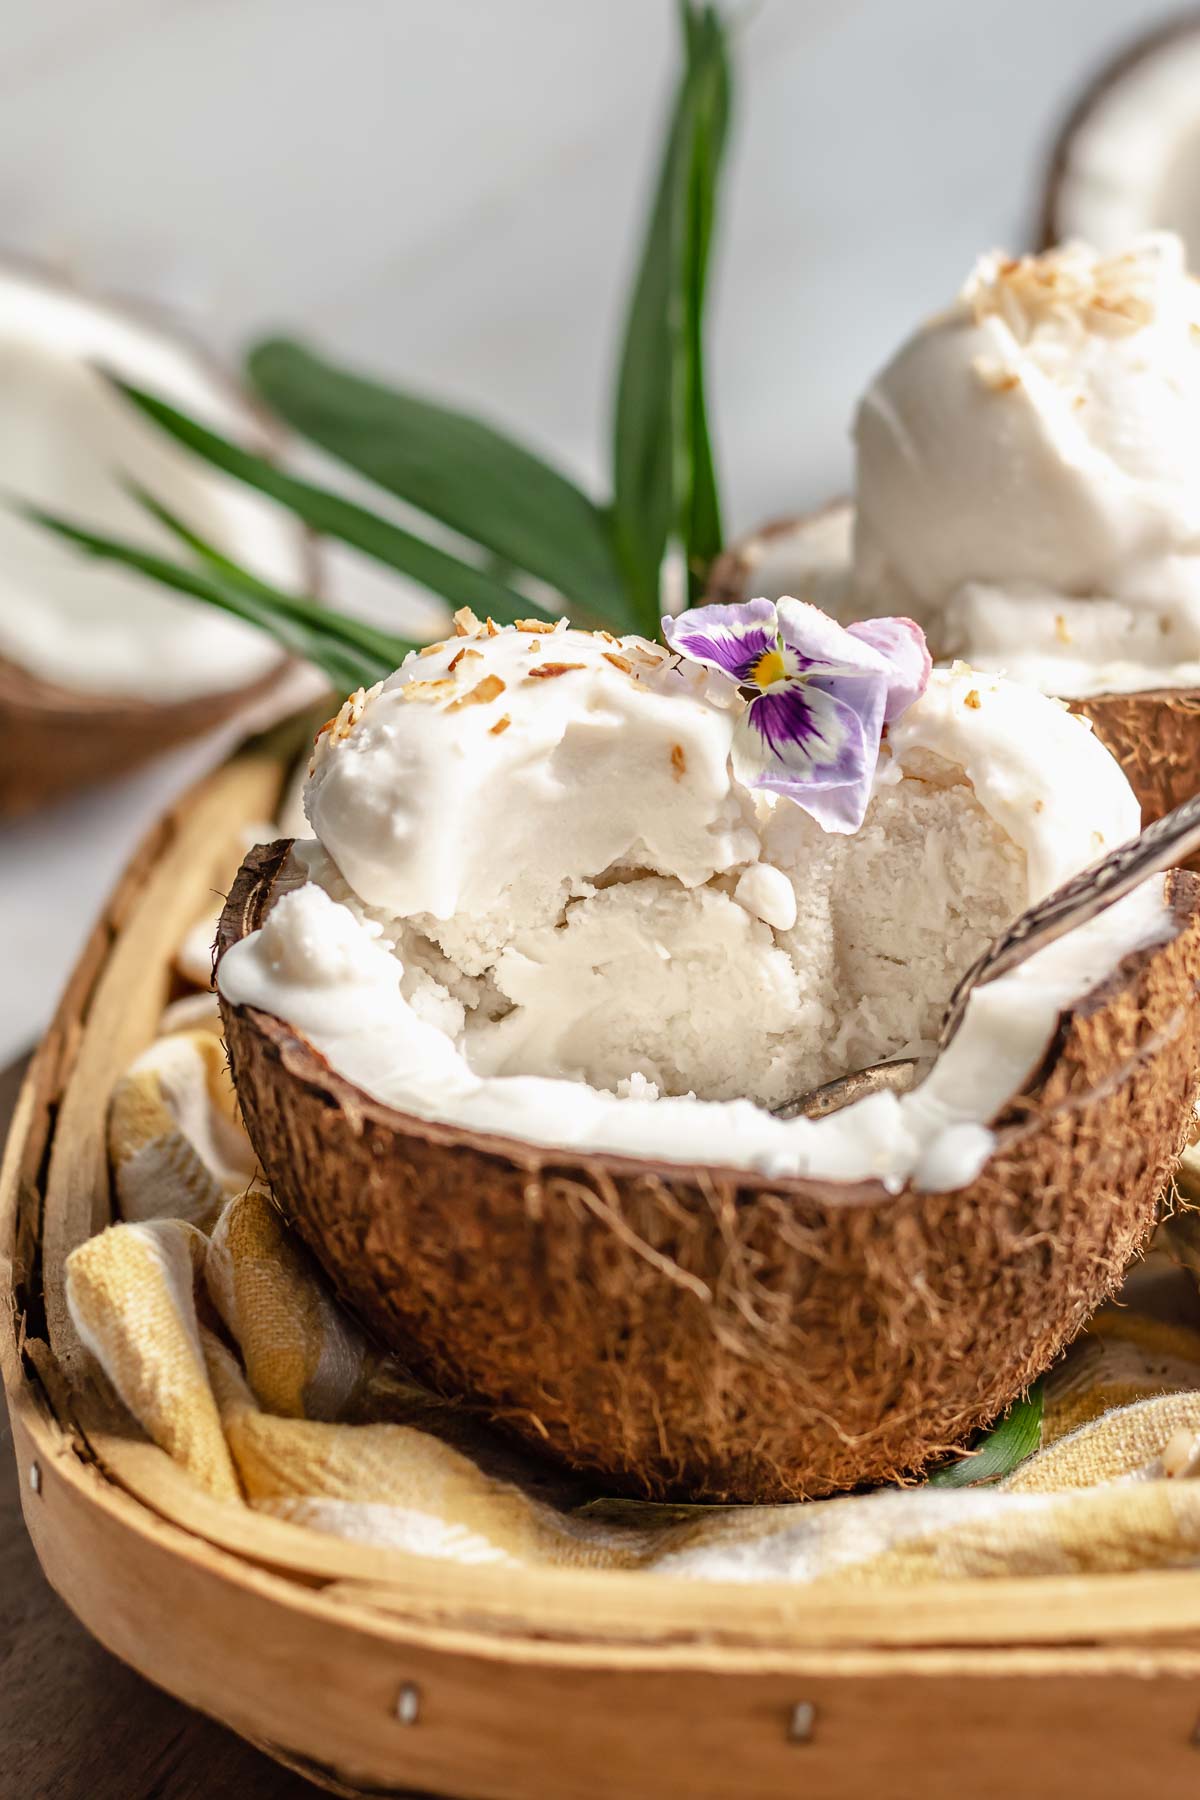 Scoops of coconut sorbet in a coconut shell with some bites removed.